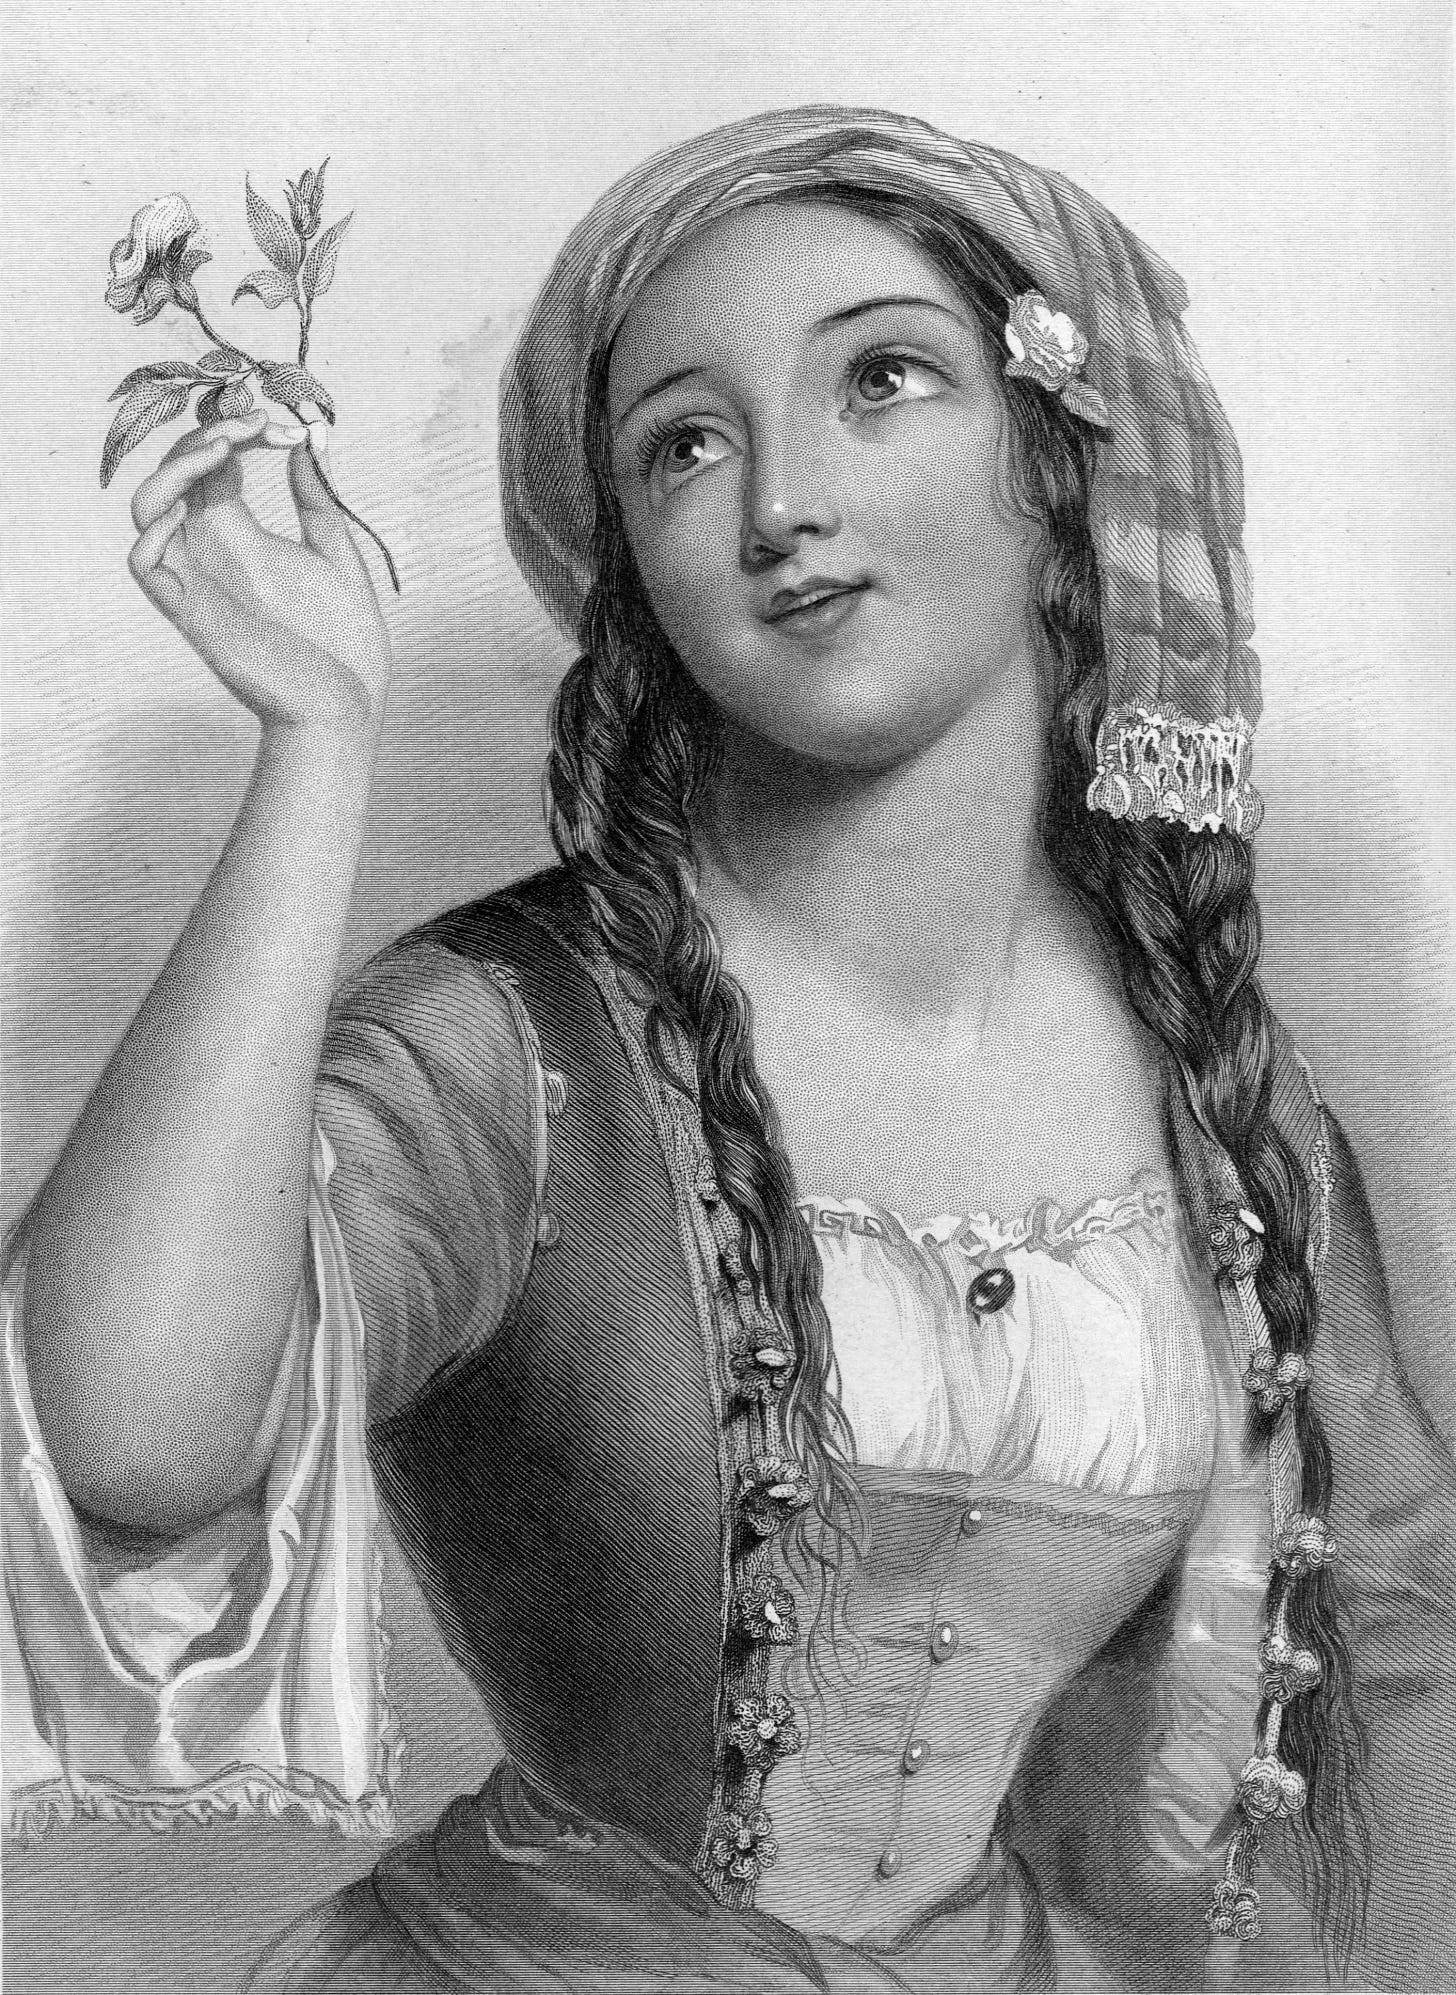 A black and white etching of a young woman with a round face. She wears a scarf around her head and her dark hair in two loose braids. She gazes at a cherry blossom she is holding in one hand.